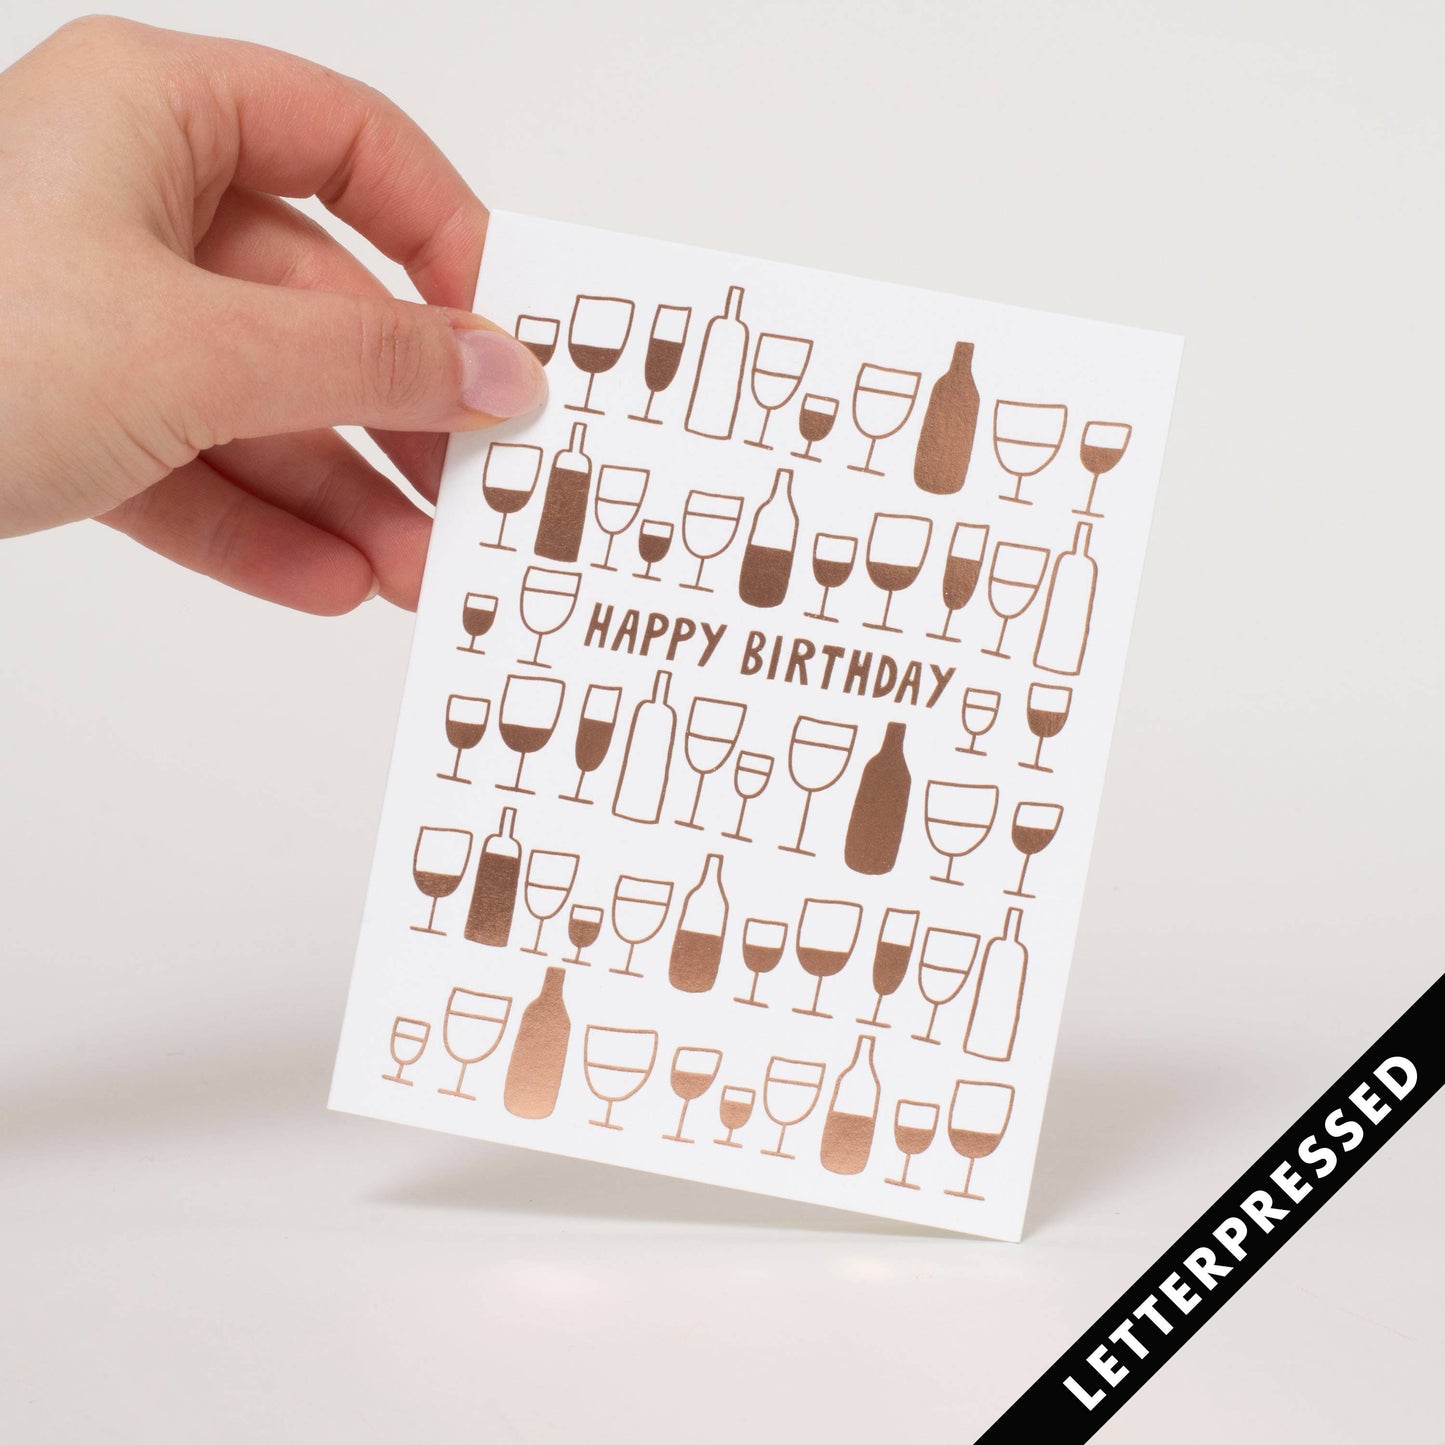 Greeting card printed in a rose gold metallic ink. Text reads "Happy Birthday" surrounded by illustration of different sized wine bottles and glasses filled at differing levels.